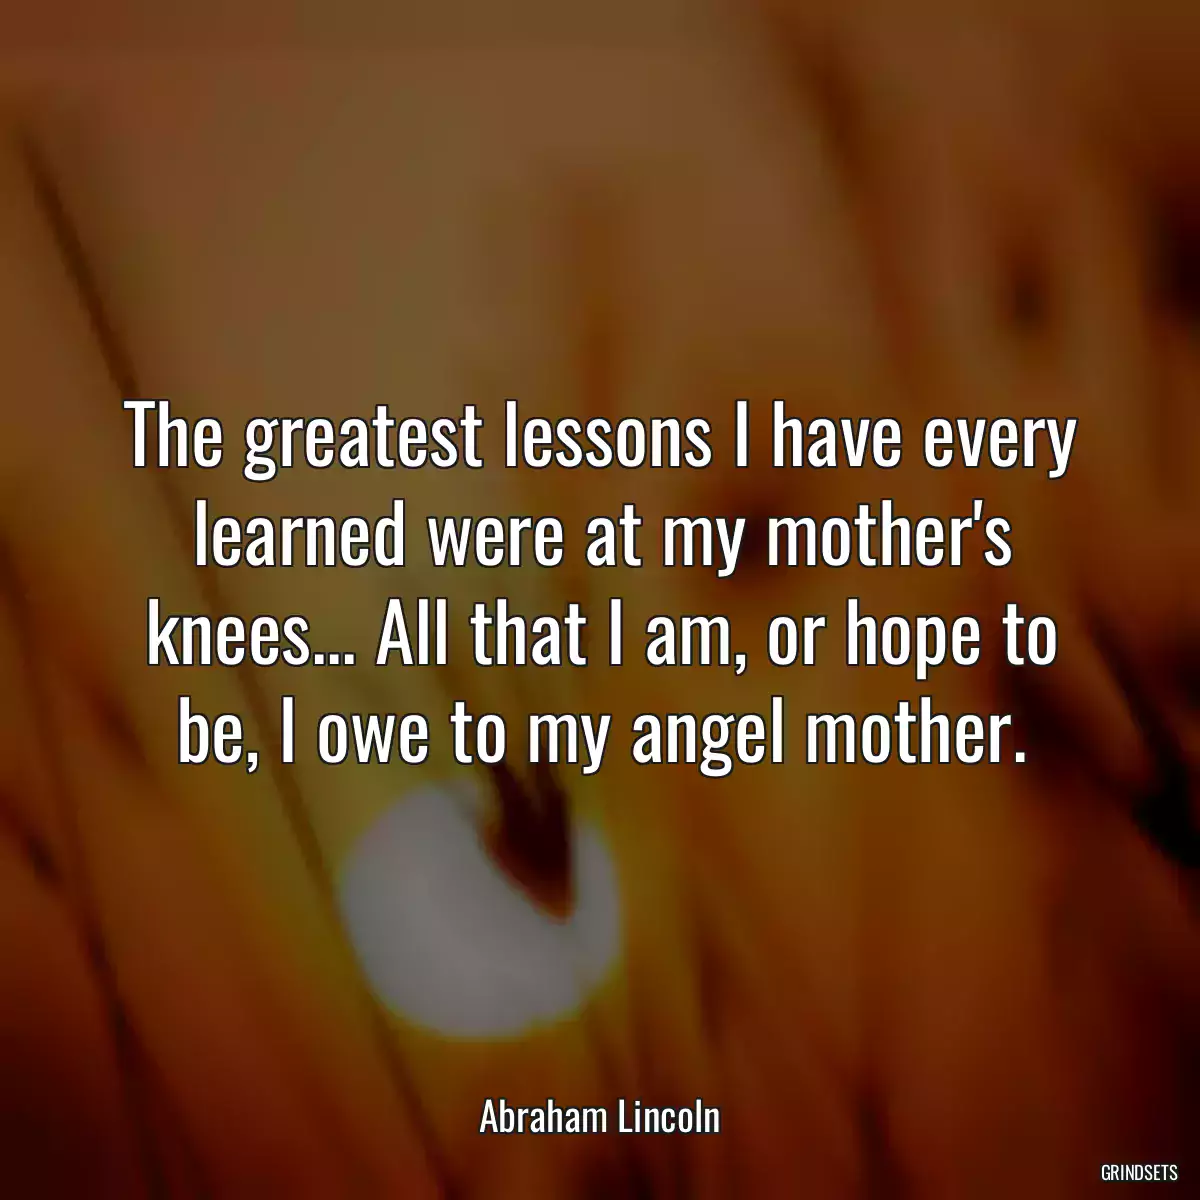 The greatest lessons I have every learned were at my mother\'s knees... All that I am, or hope to be, I owe to my angel mother.